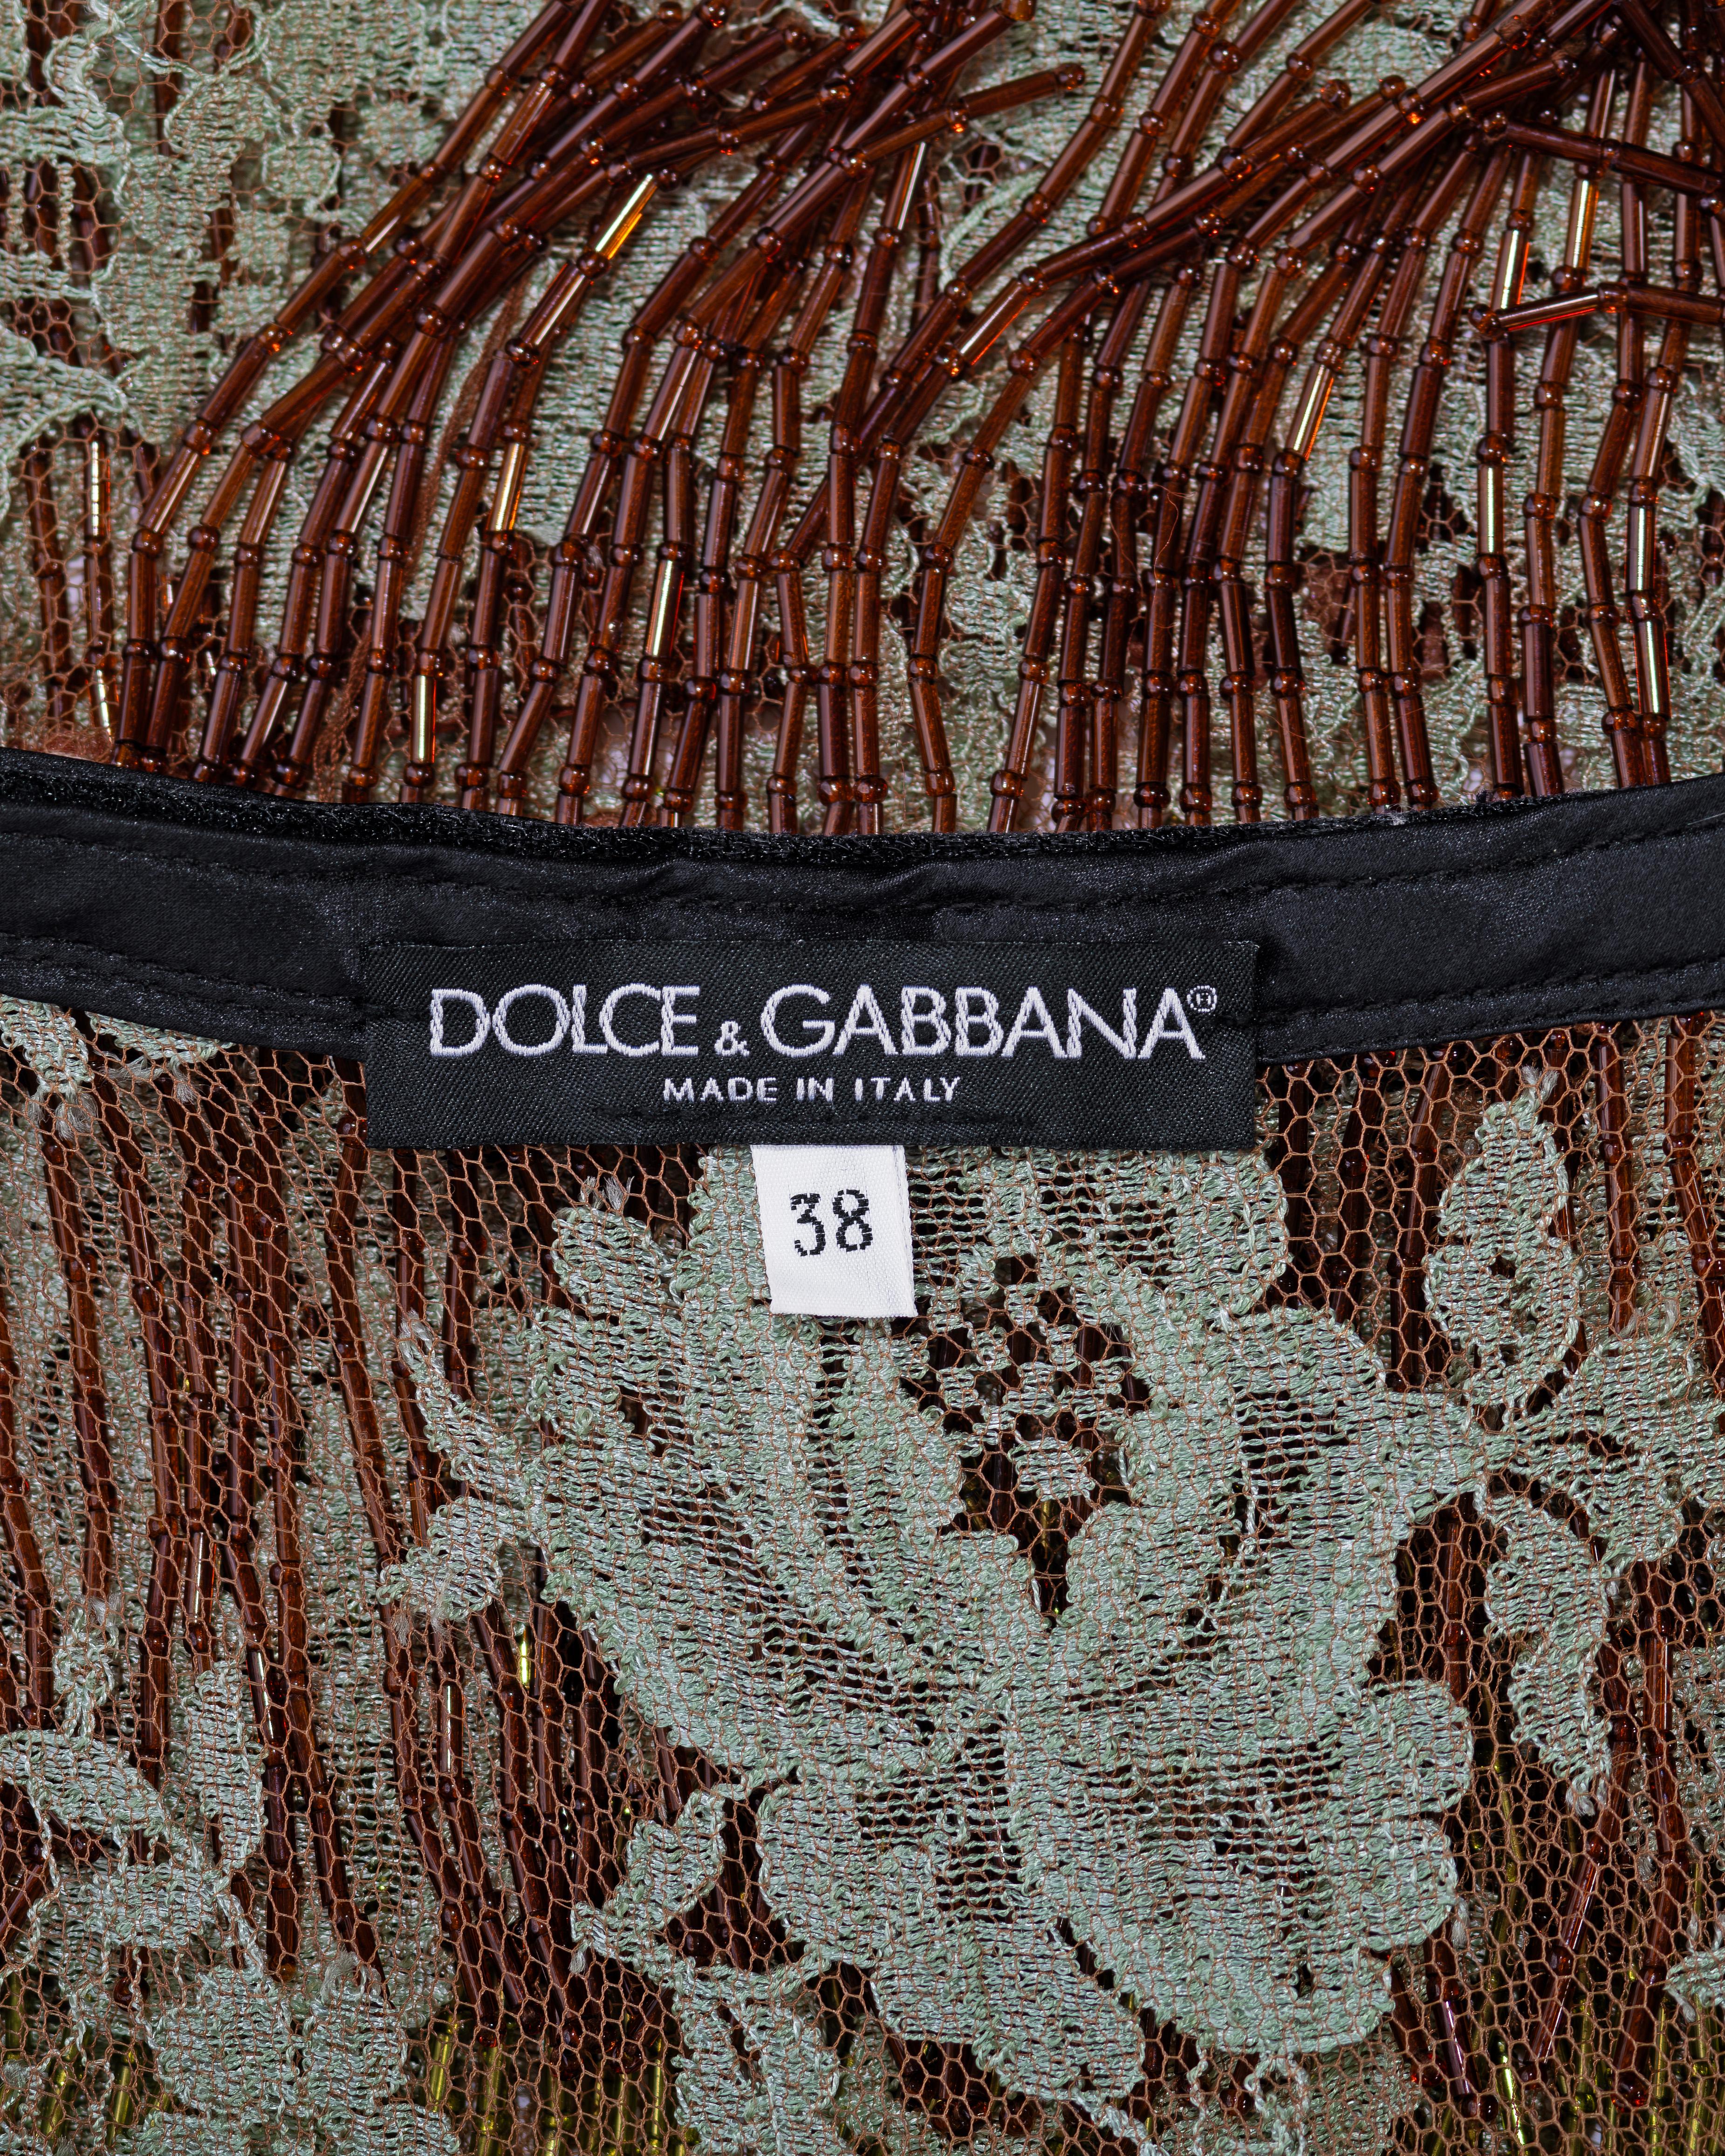 Dolce & Gabbana Beaded Fringe and Metallic Lace Top and Pants Set, SS 2000 For Sale 9